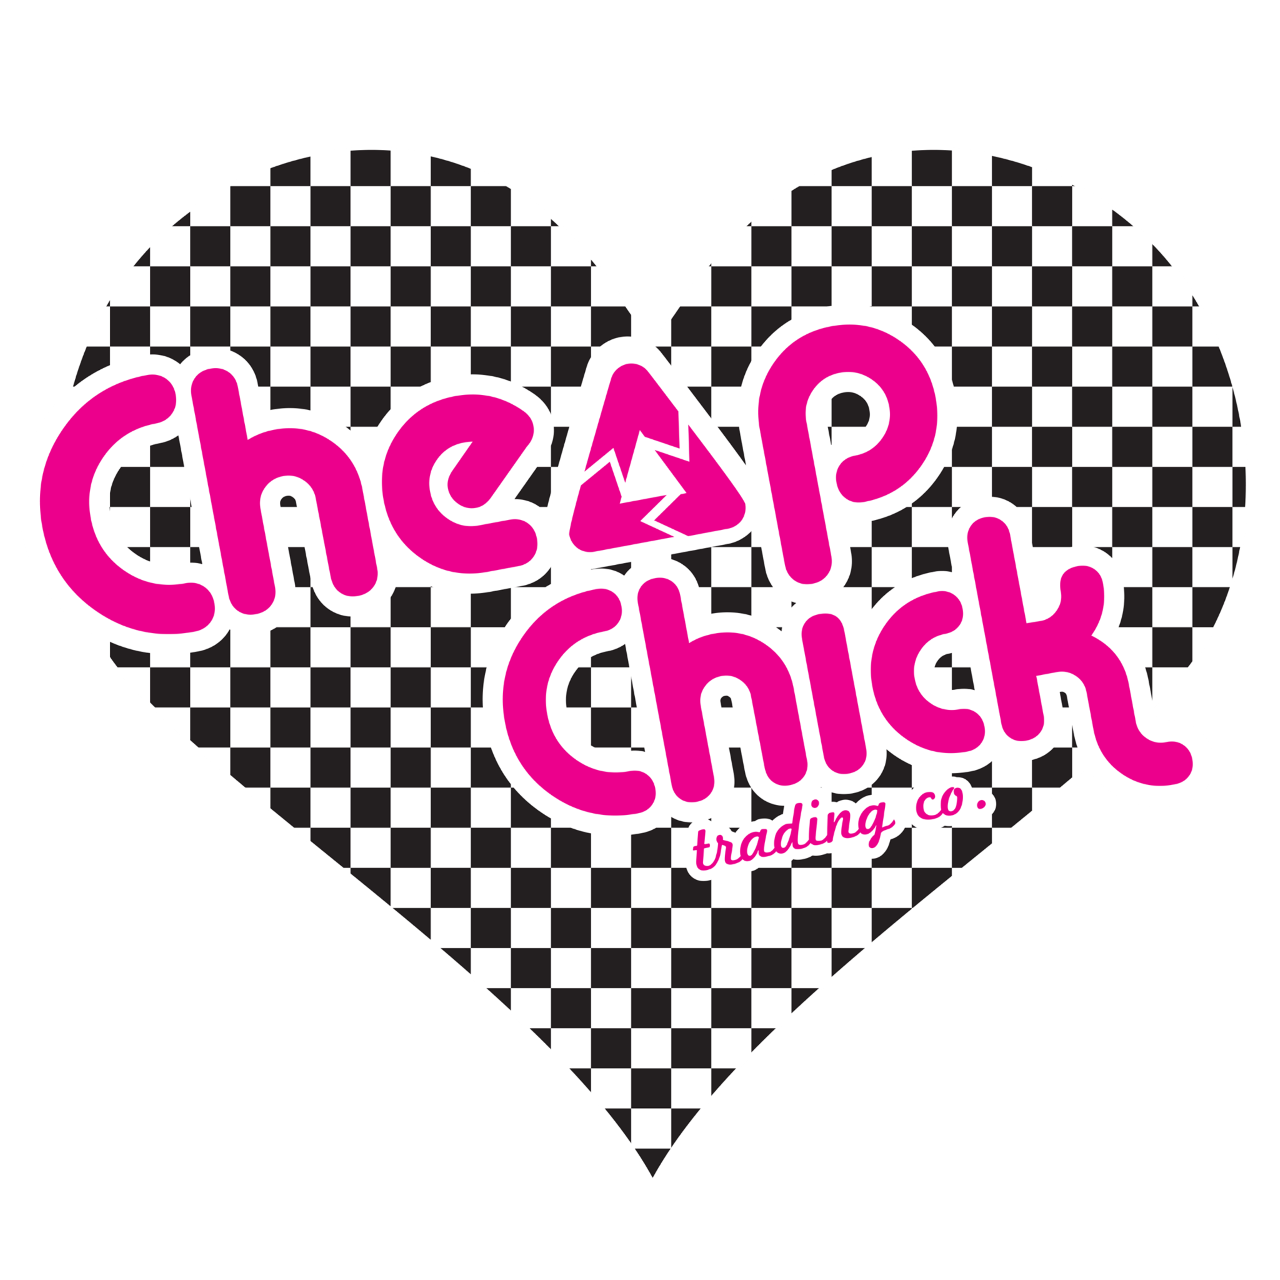 cheap chick trading co.